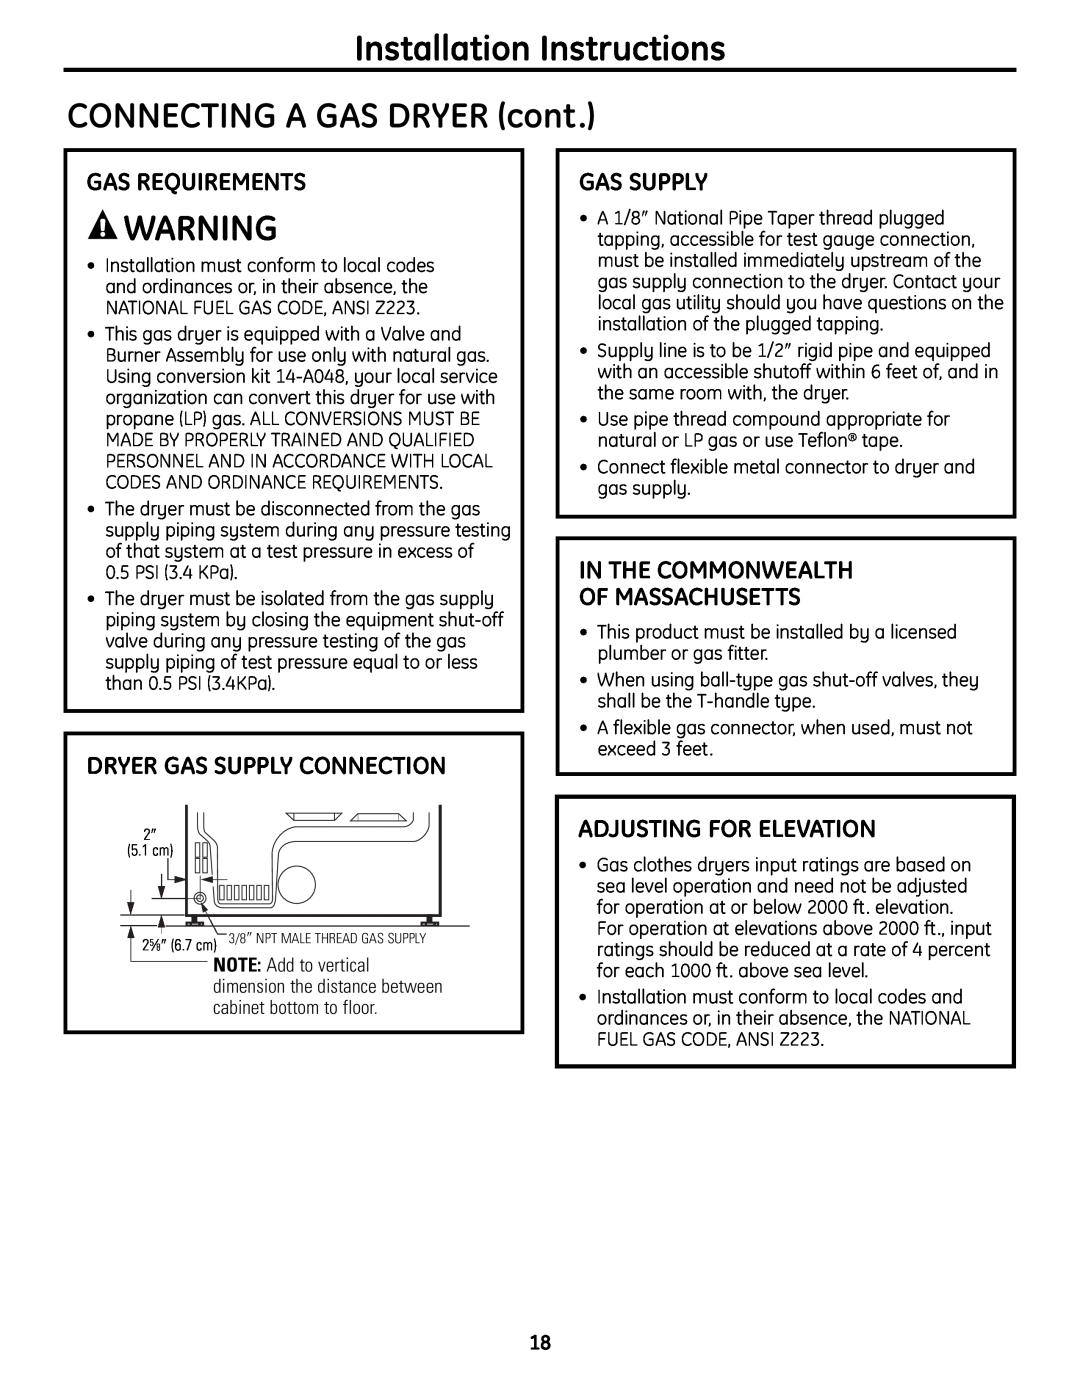 GE UPVH890 Installation Instructions CONNECTING A GAS DRYER cont, Gas Requirements, Dryer Gas Supply Connection 